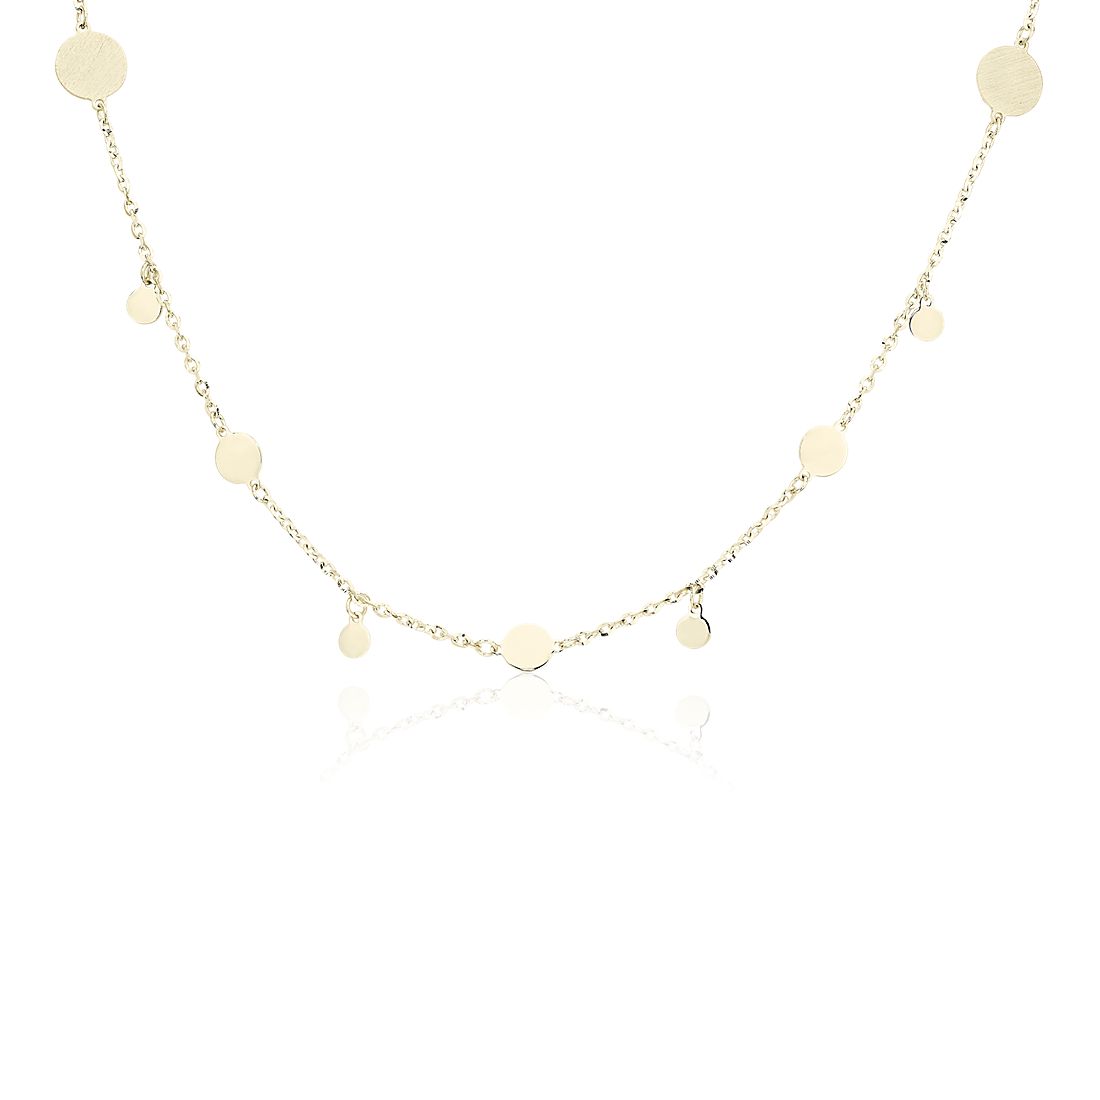 18" Dangling Disc Necklace in 14k Italian Yellow Gold (1.3 mm)